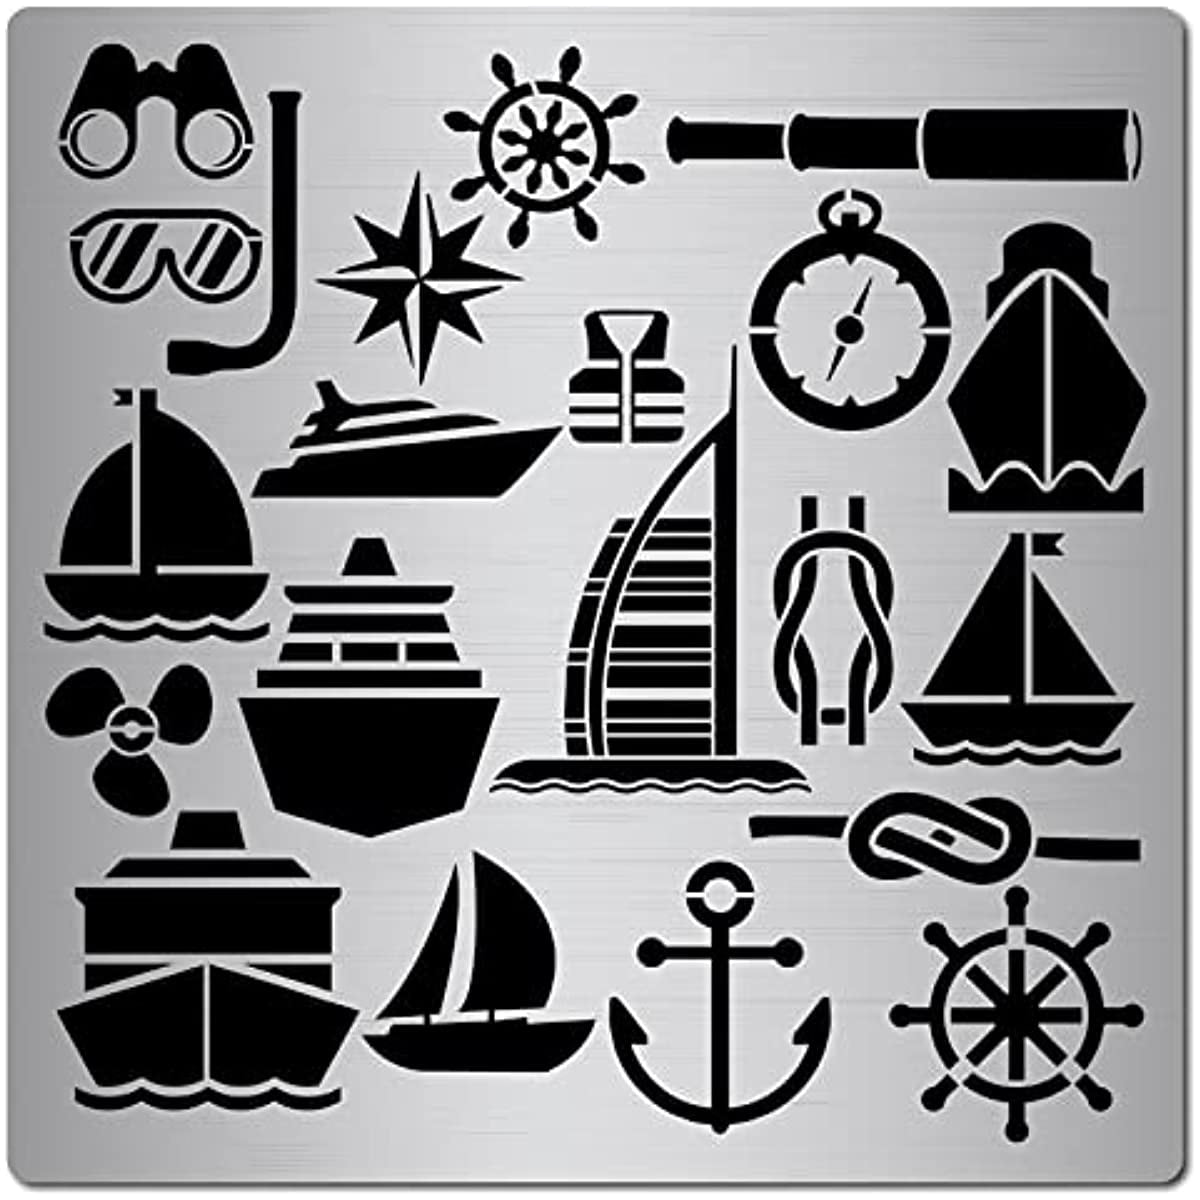 6.3x6.3Inch Wood Burning Metal Stencils Template for Wood carving, Drawings, Woodburning, Engraving and Scrapbooking Project